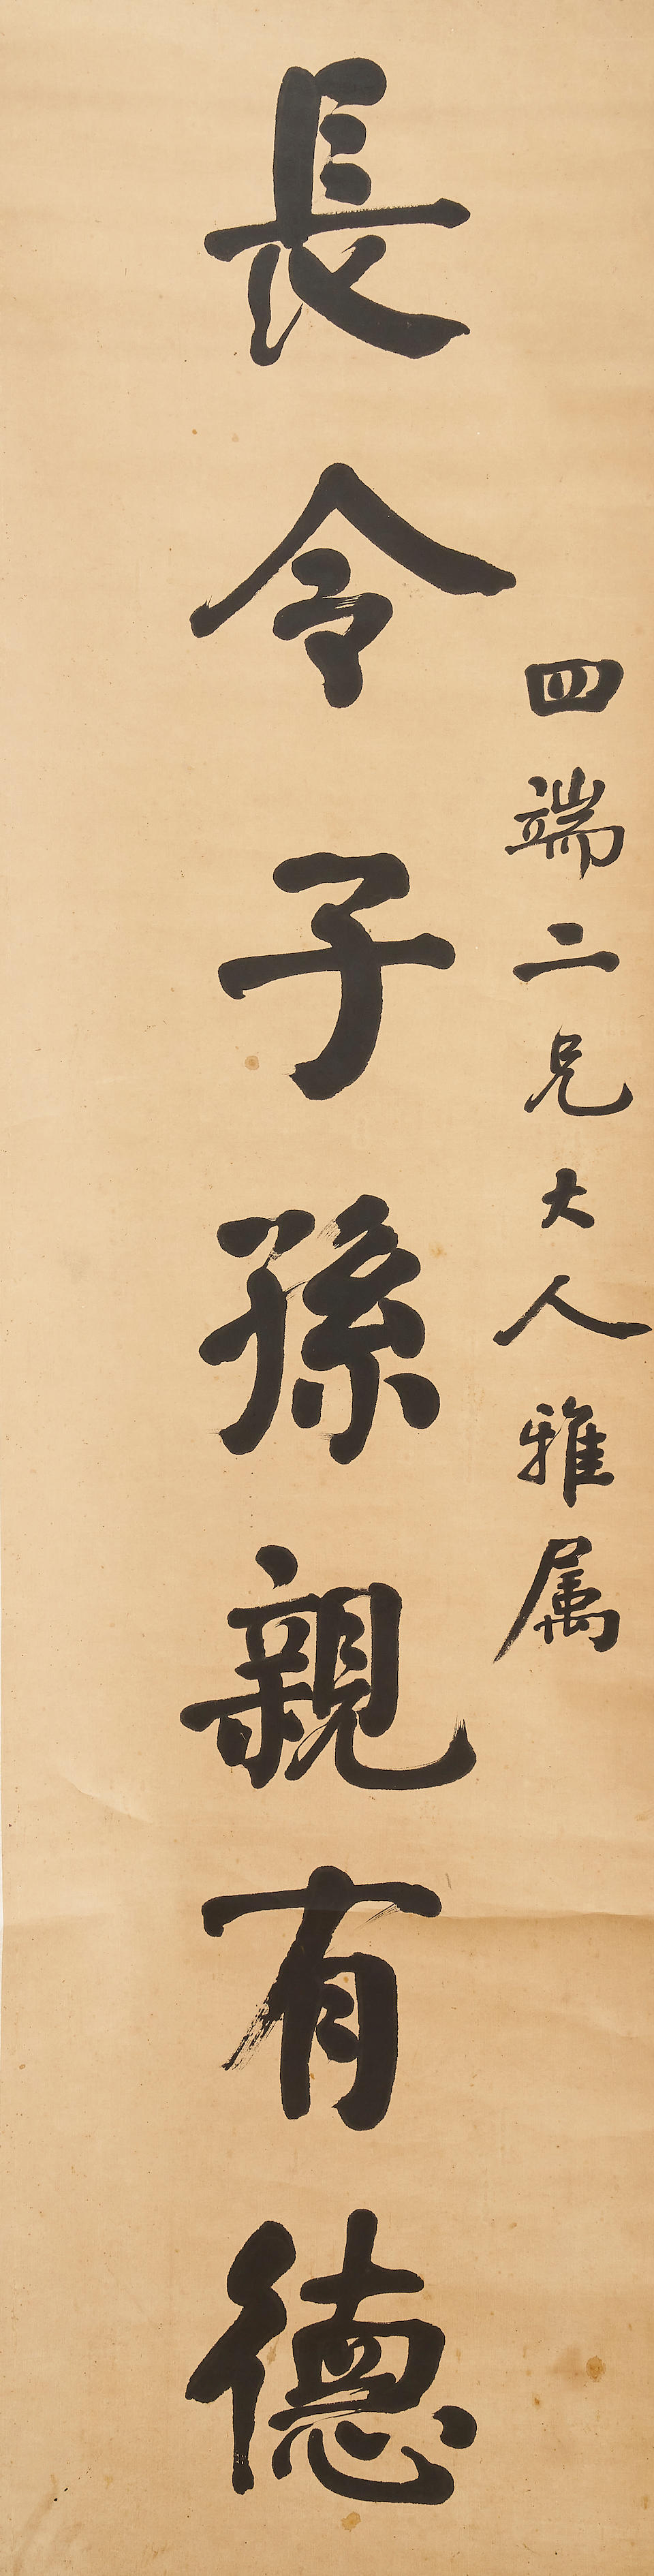 Huang Yiji (1850-1900) Calligraphy Couplet in Running Style (2) - Image 2 of 3